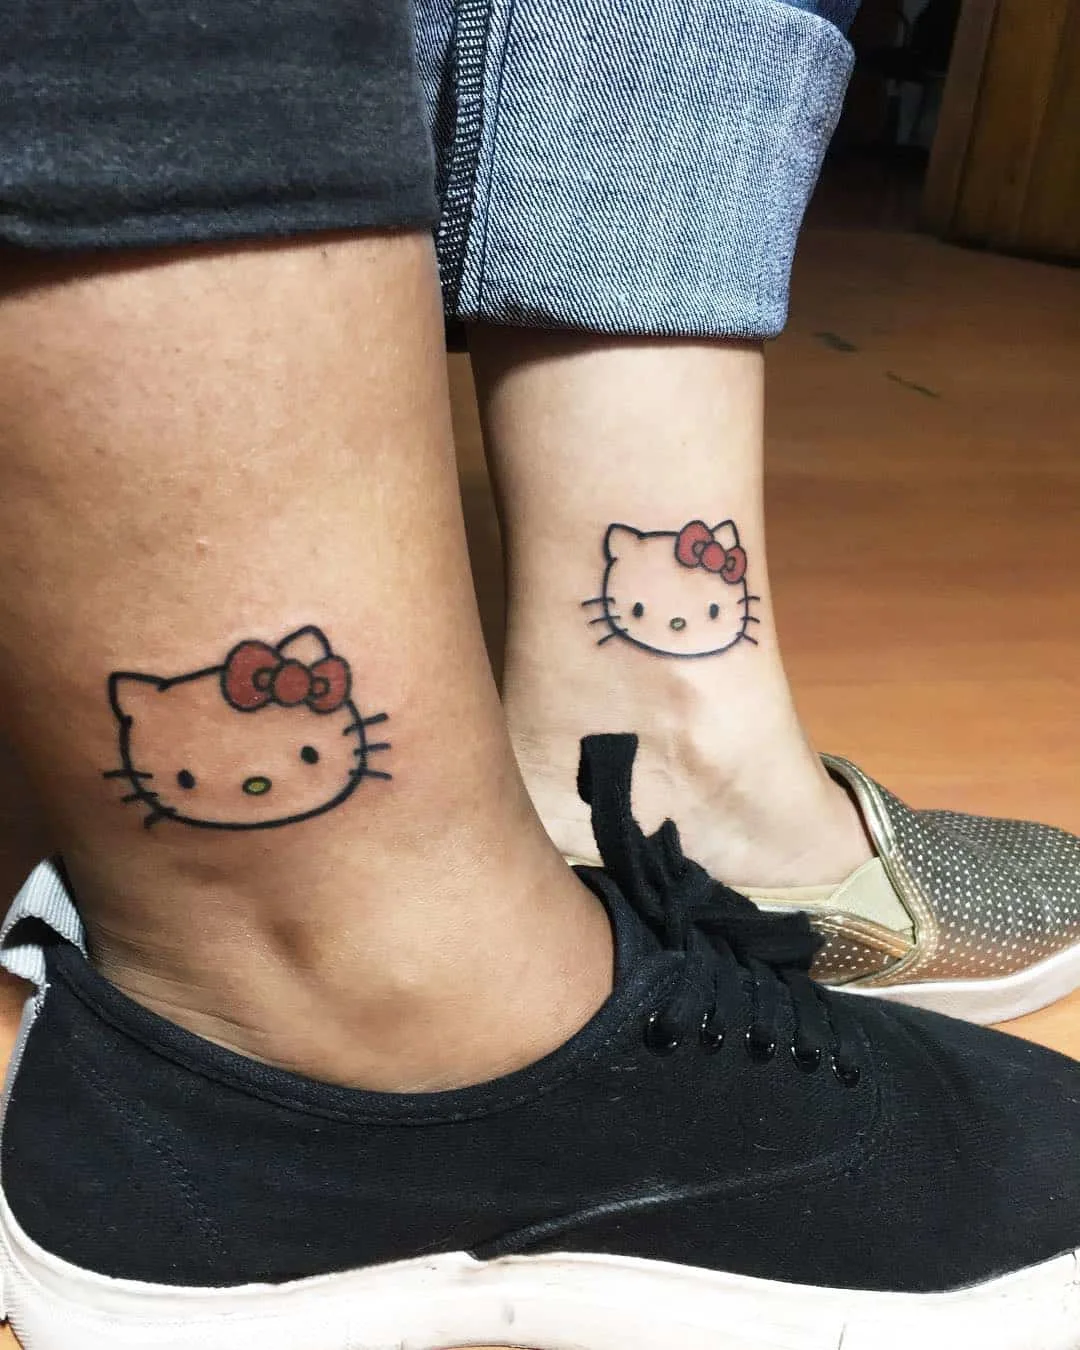 Cute Hello Kitty matching tattoos for girlfriends